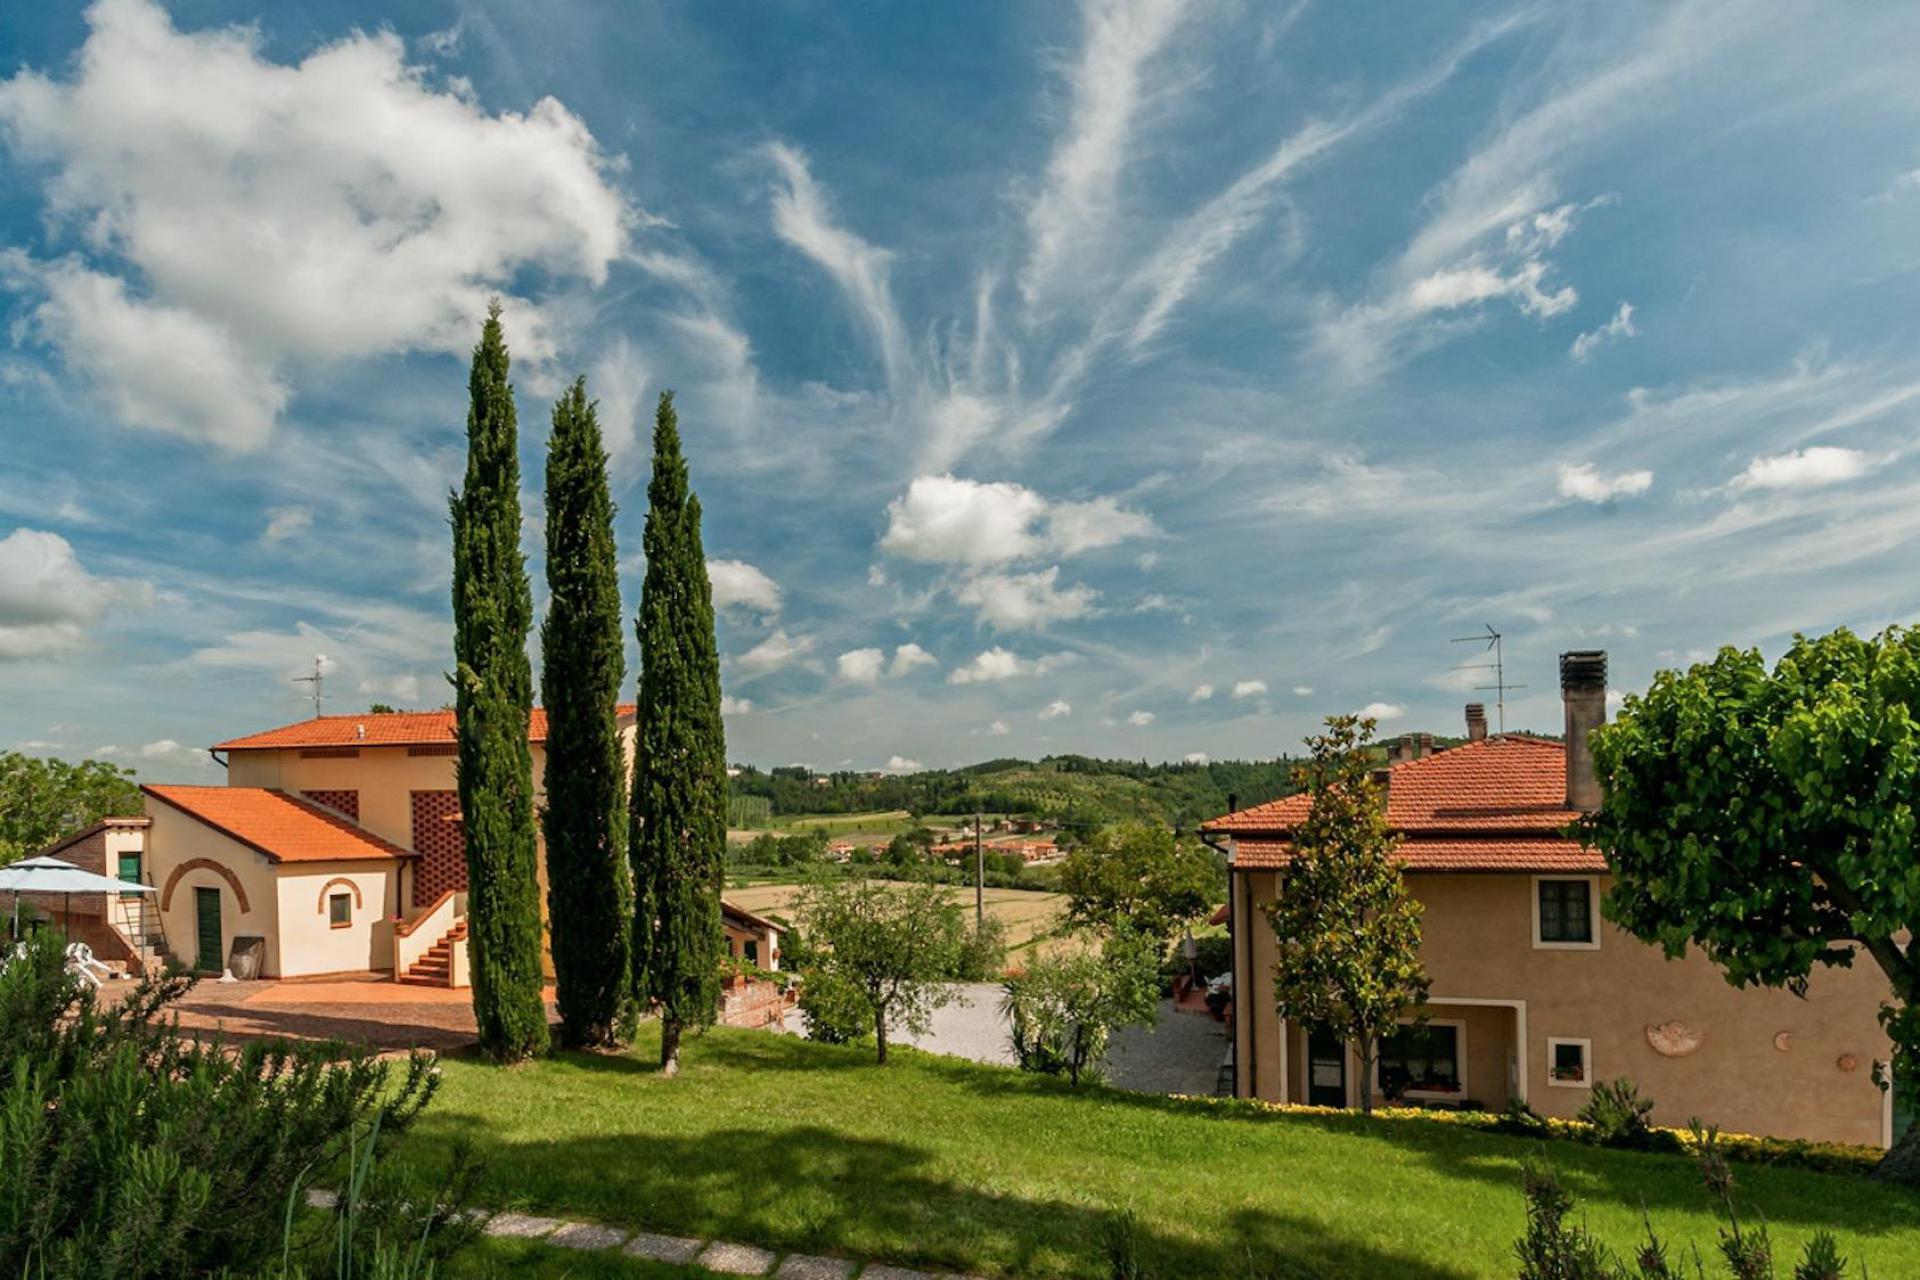 Agriturismo with children's pool and playground